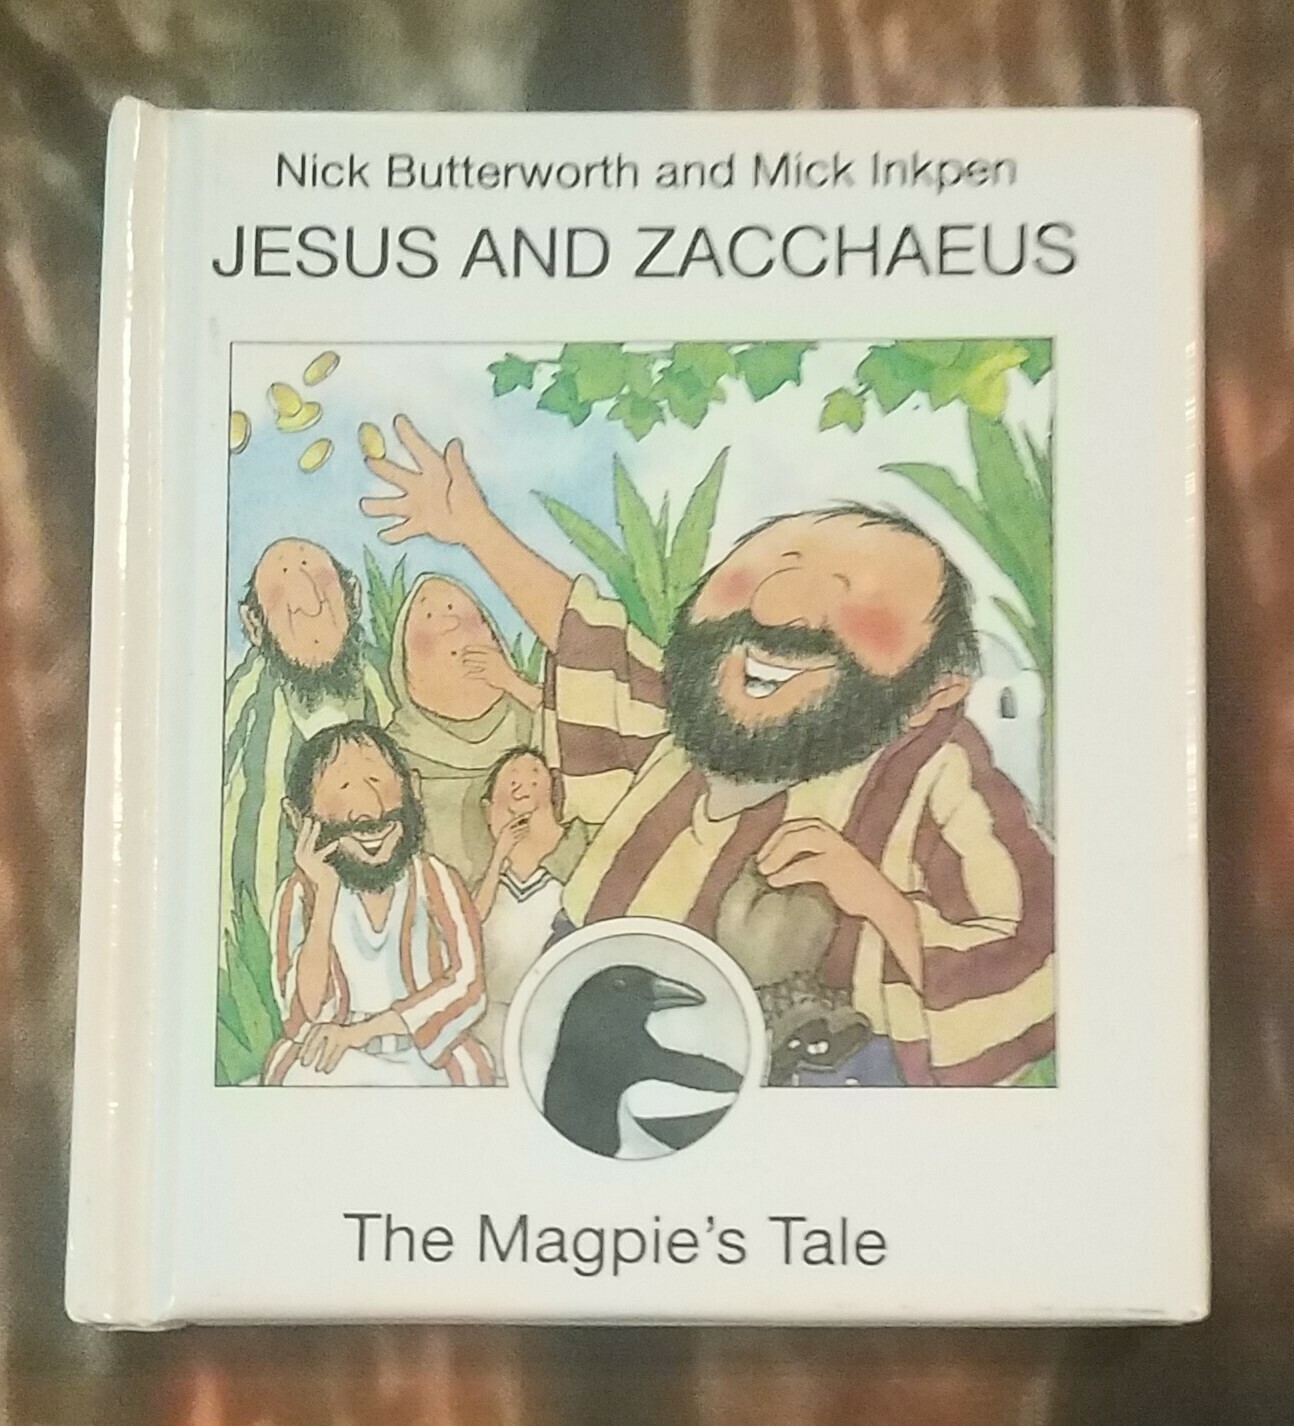 Jesus and Zacchaeus: The Magpie's Tale by Nick Butterworth and Mick Inkpen